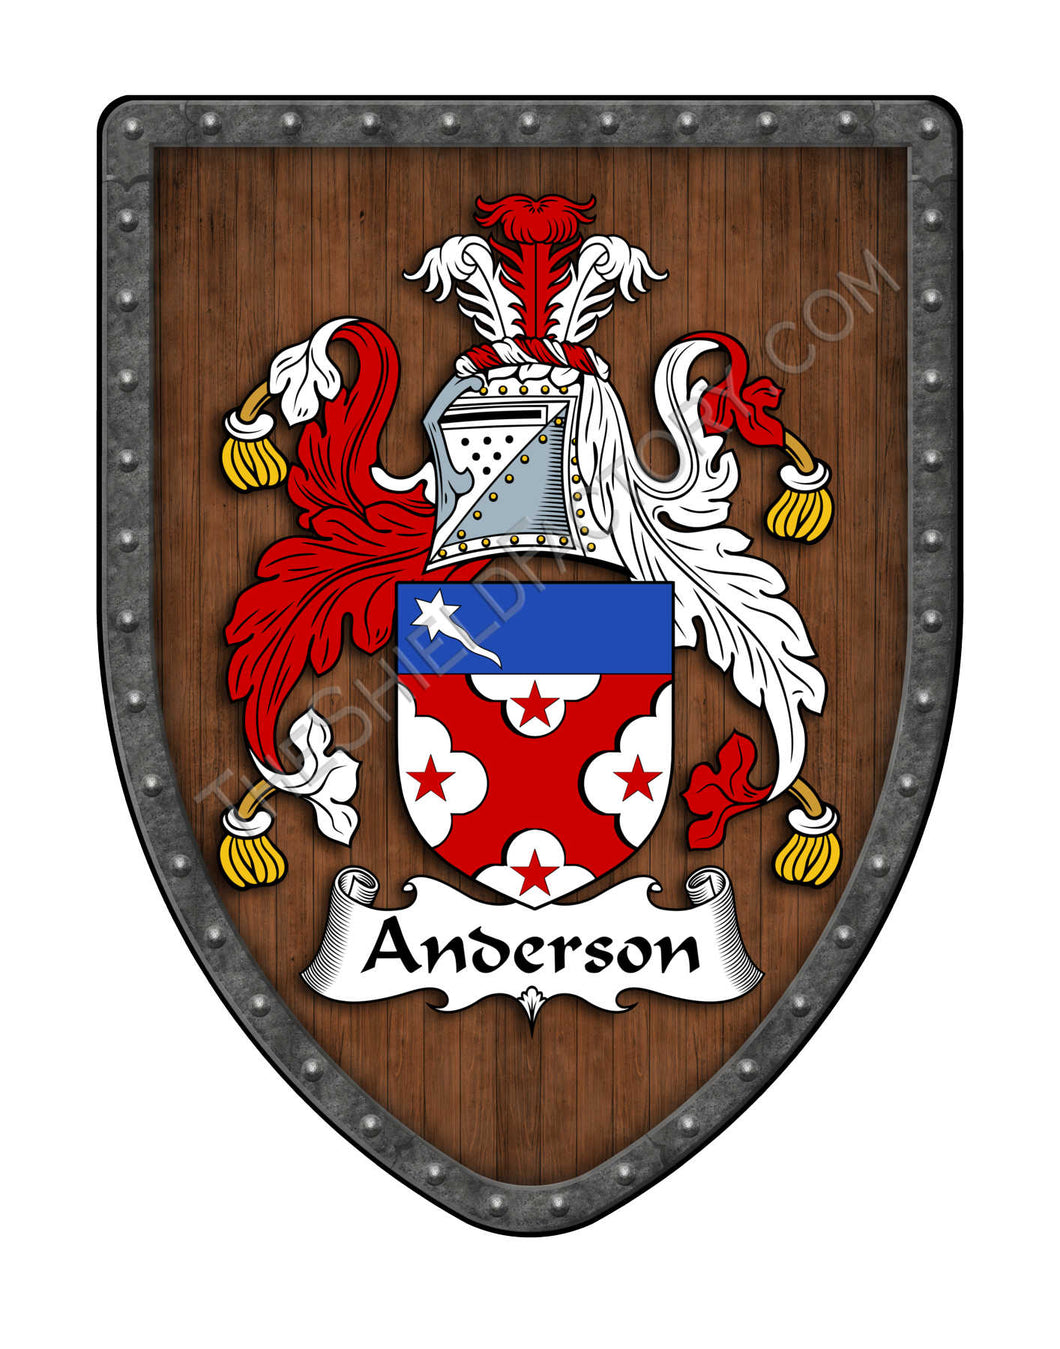 Anderson Coat of Arms Family Crest